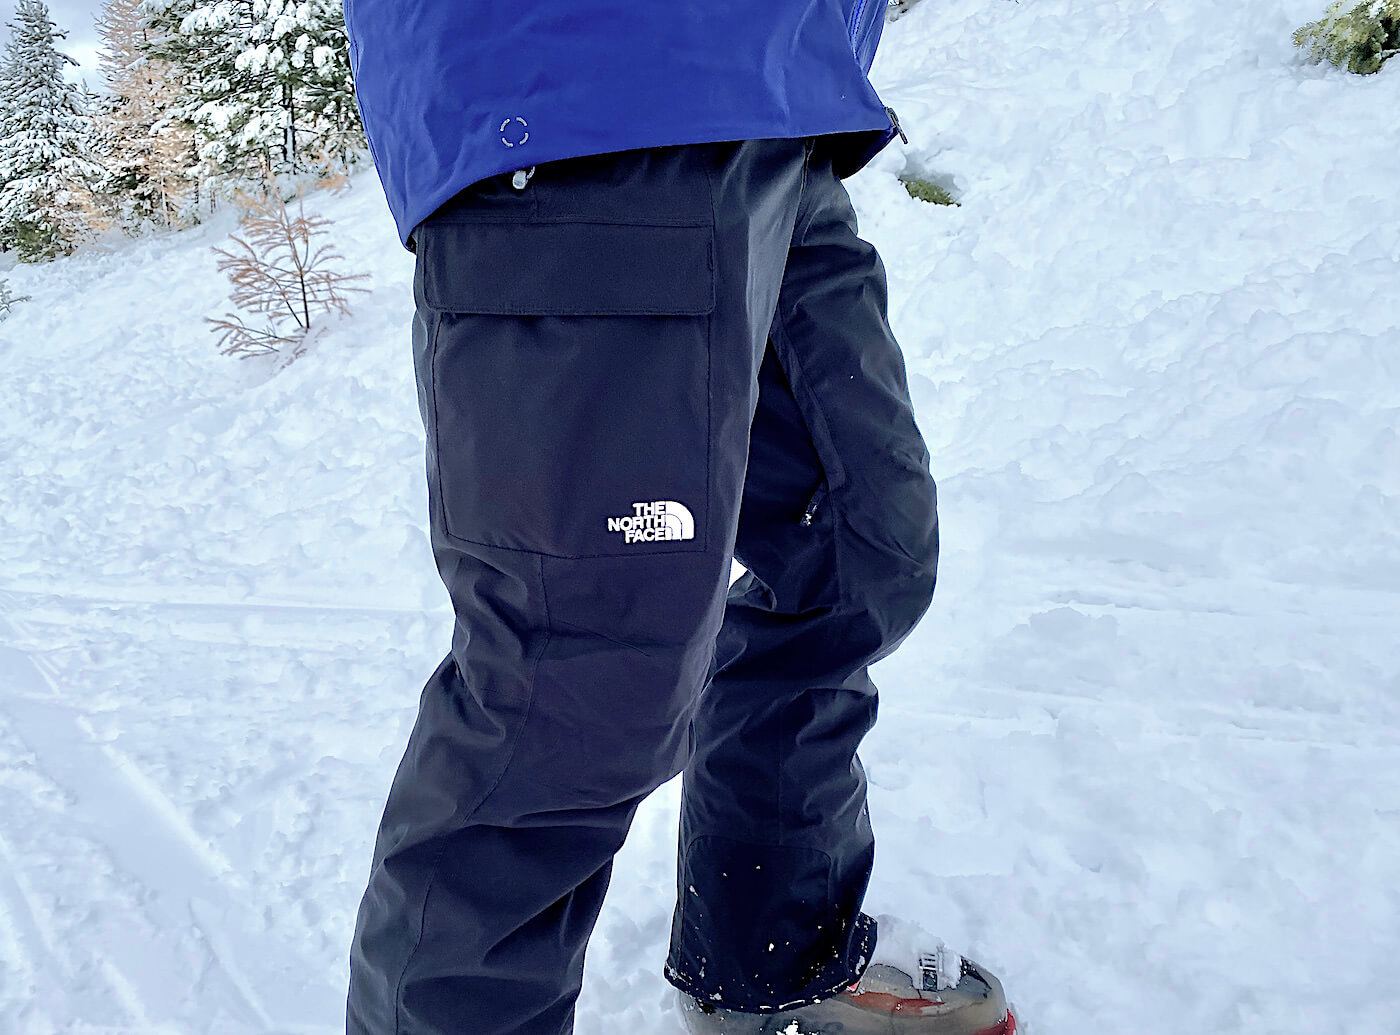 The North Face Freedom Ski Pants Review